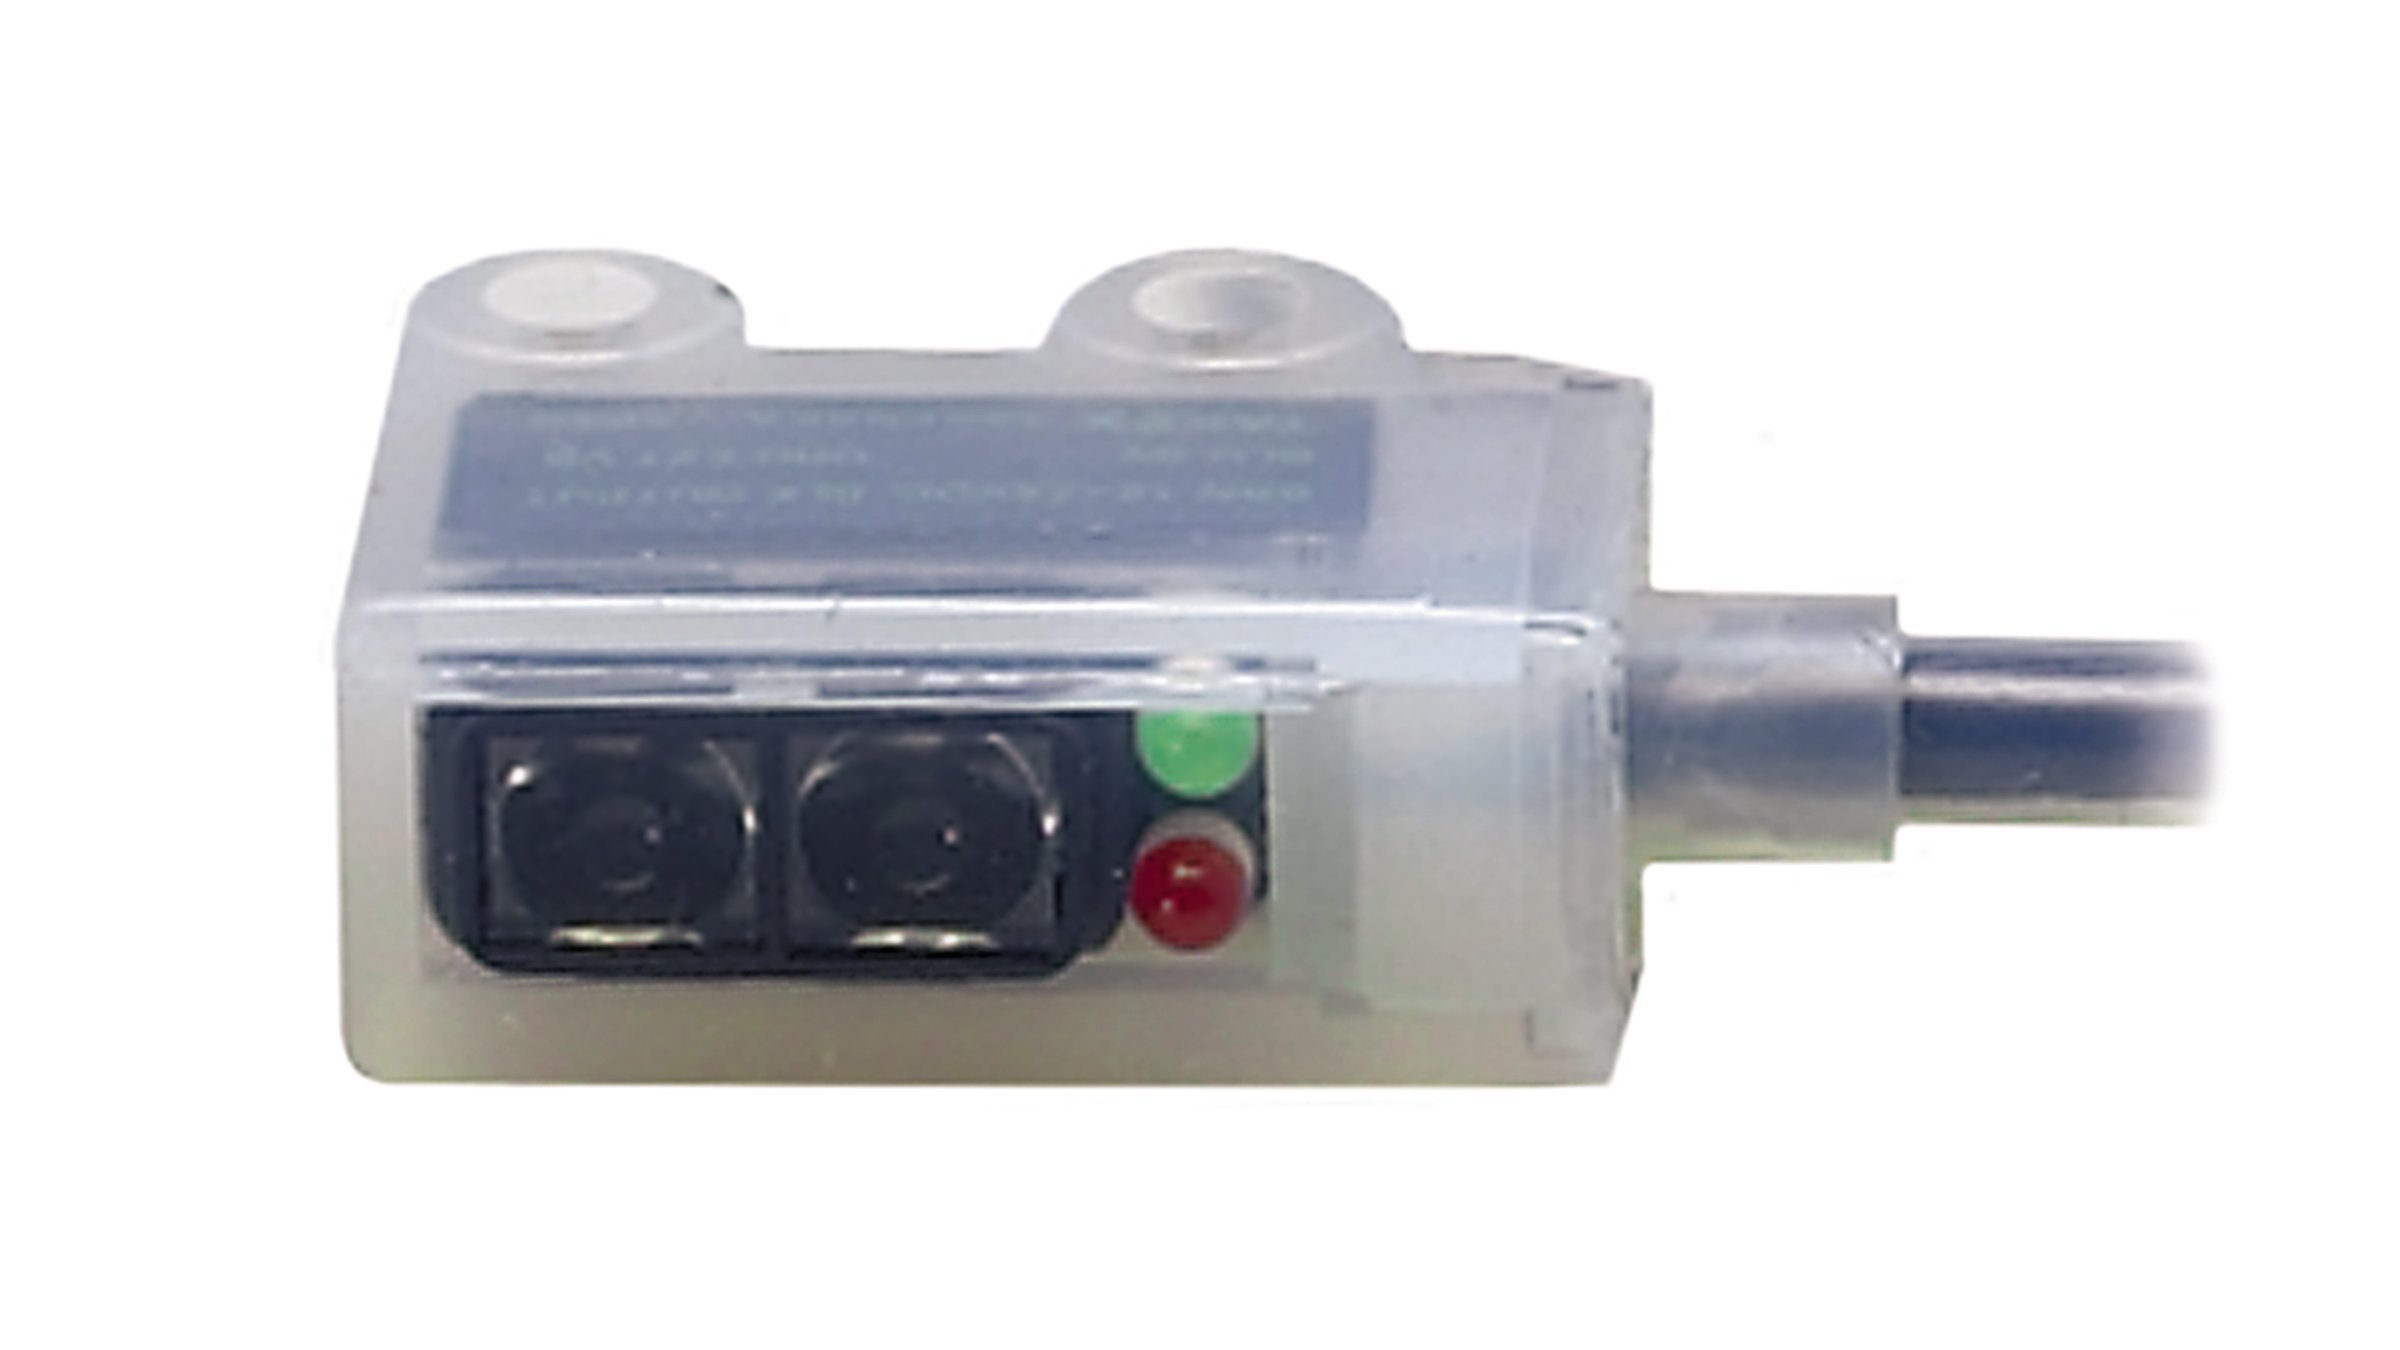 Allen-Bradley translucent fully encased sensor with red and green LED indicators and integrated cable.